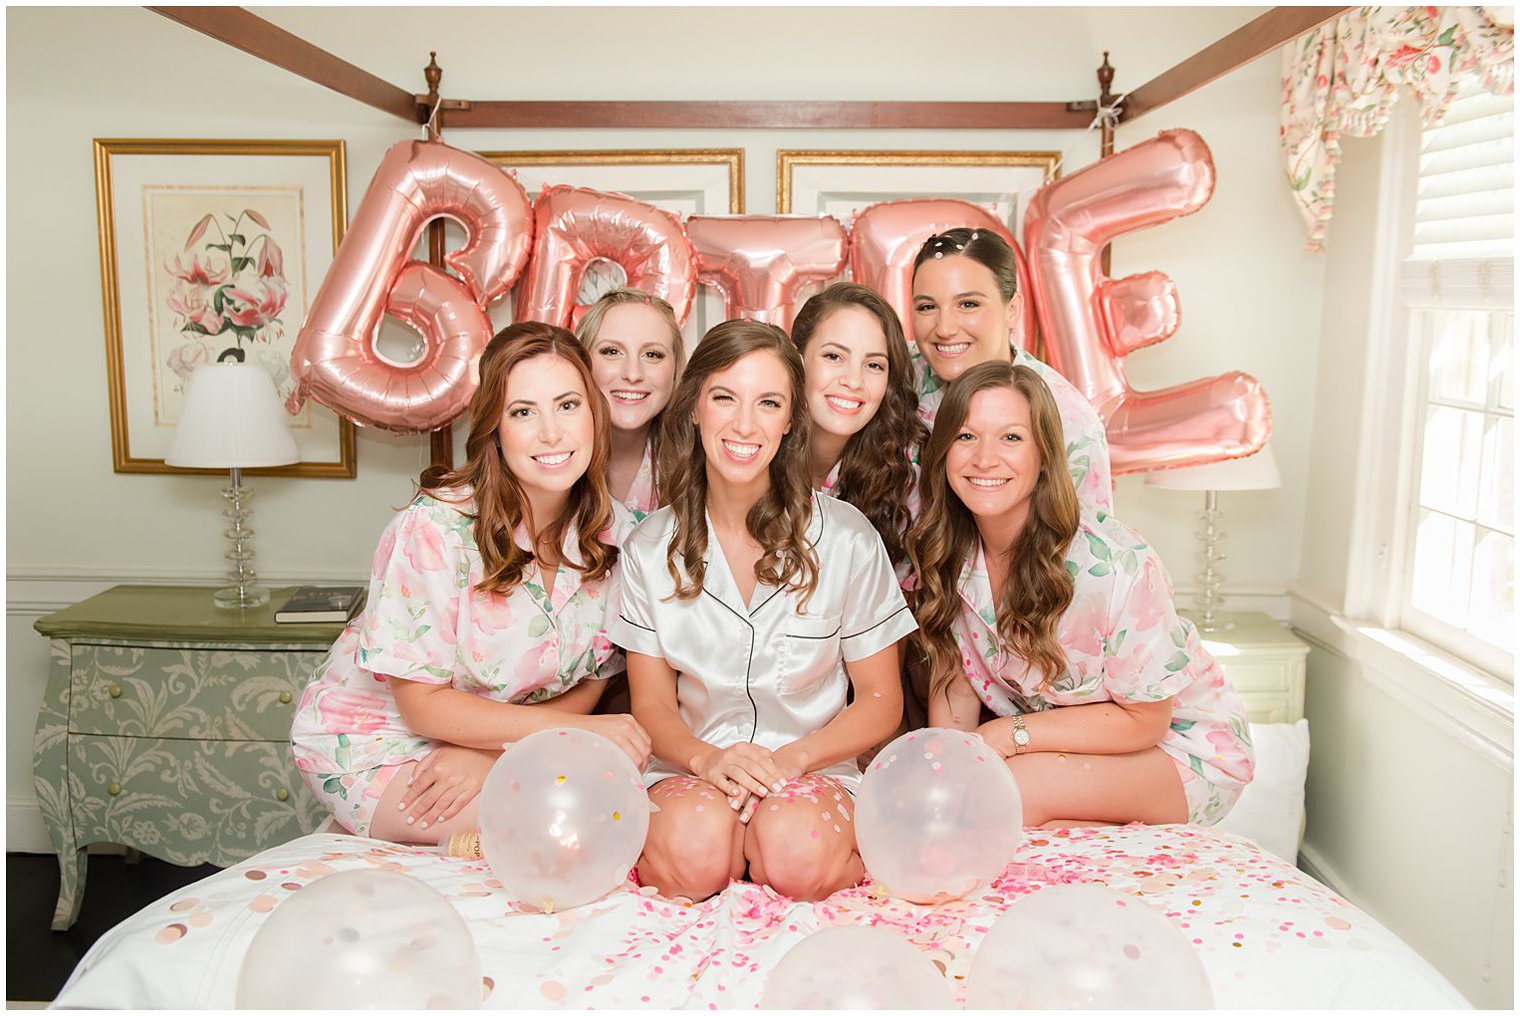 bride and bridesmaids sit on bed together during wedding prep